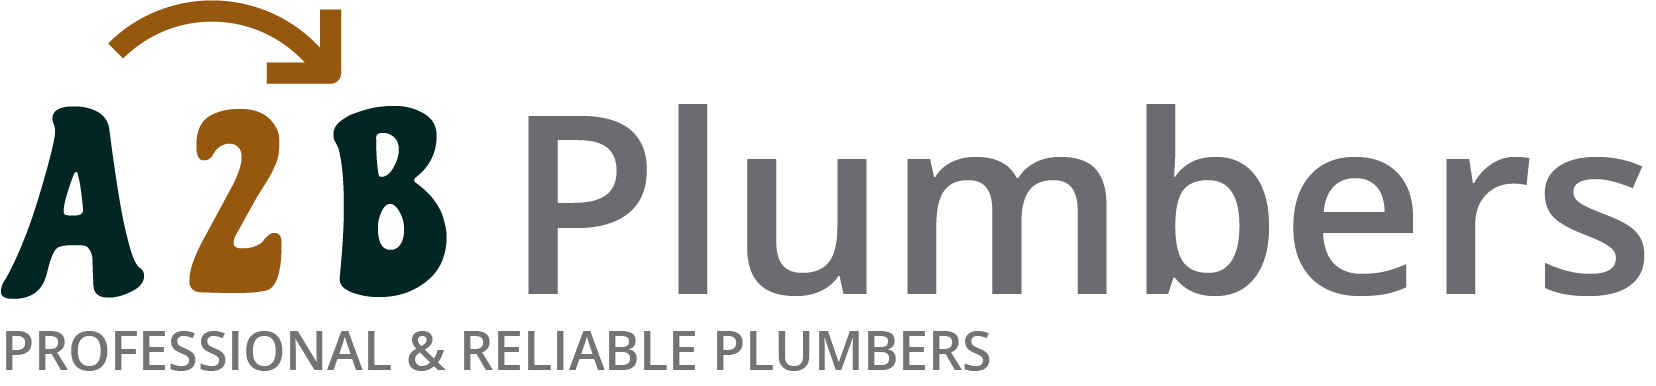 If you need a boiler installed, a radiator repaired or a leaking tap fixed, call us now - we provide services for properties in Coalville and the local area.